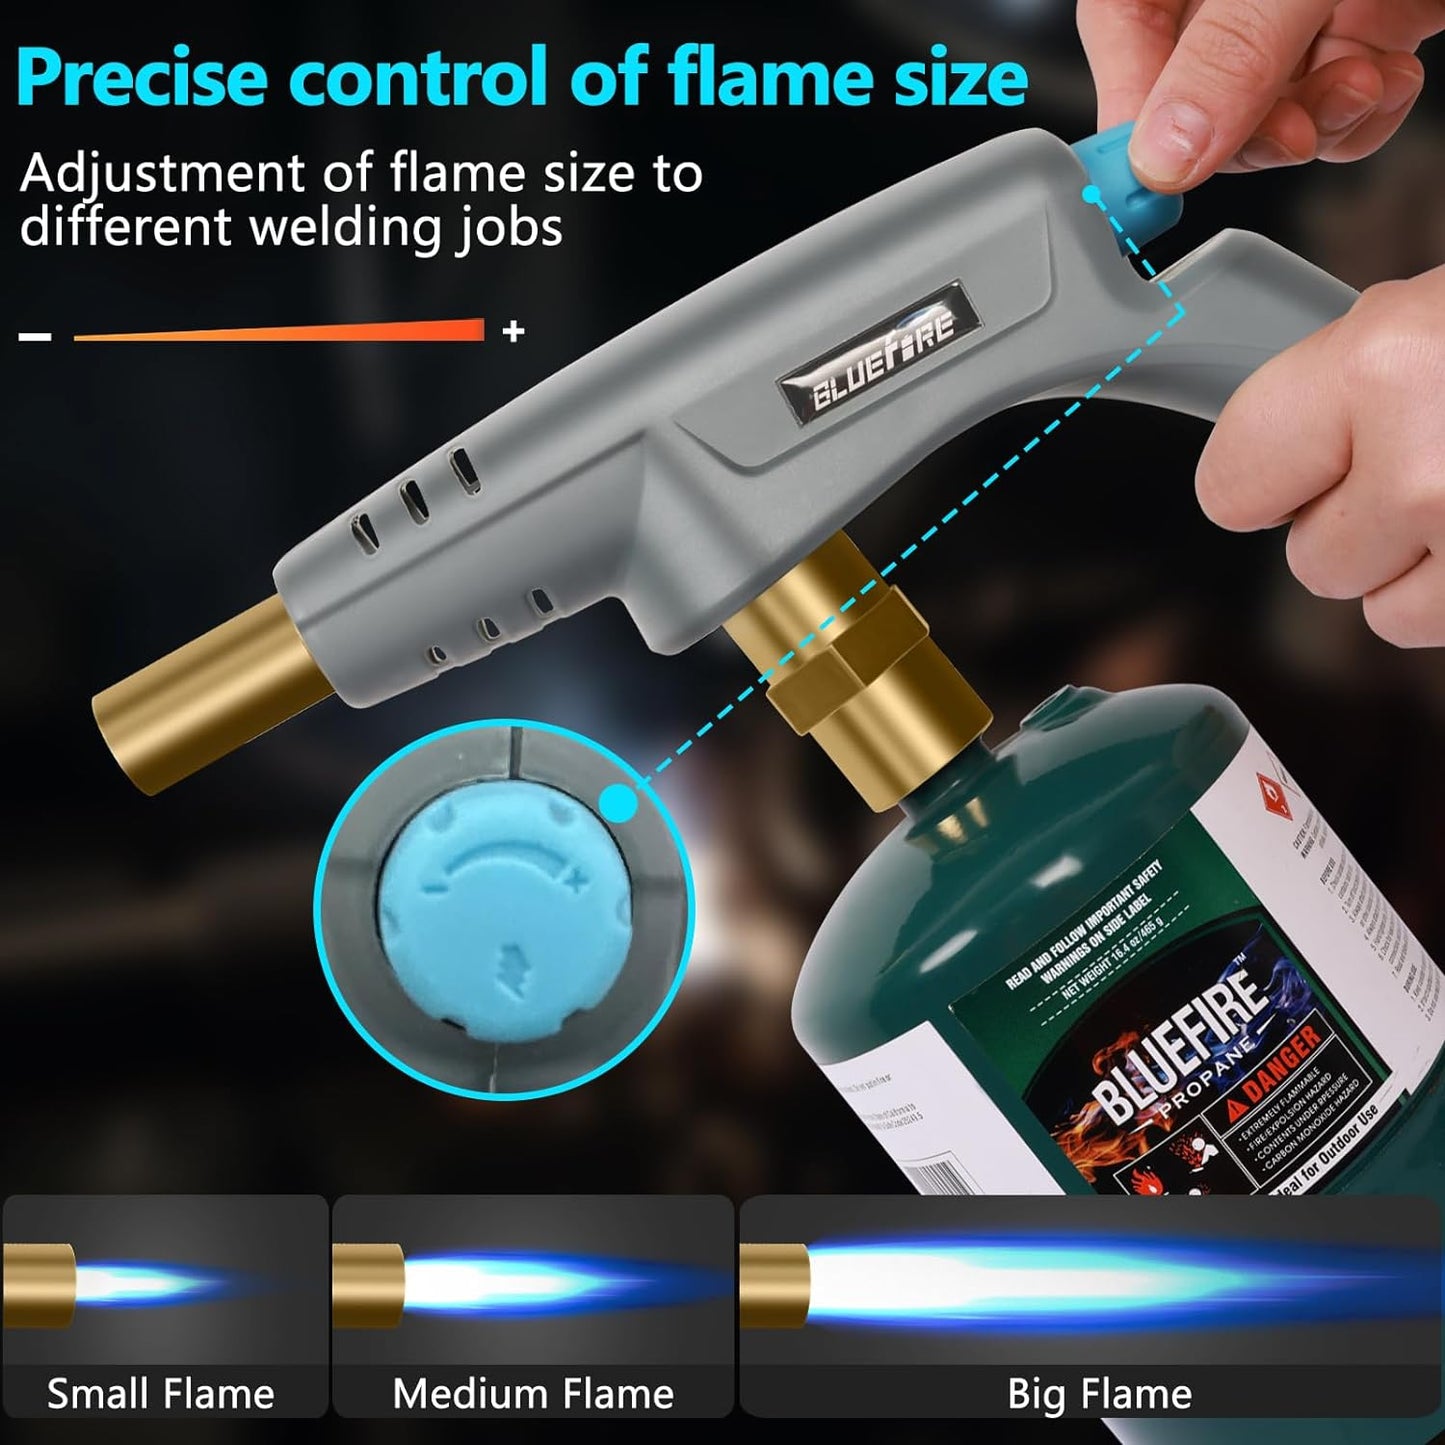 BLUEFIRE Powerful Propane Torch Head, Trigger Start Mapp Gas Turbo Torch Map Gas Torch Kit with Adjust Flame, Grill Gun Torch for Soldering Cooking Welding brazing Fuel by MAPP, MAP/PRO